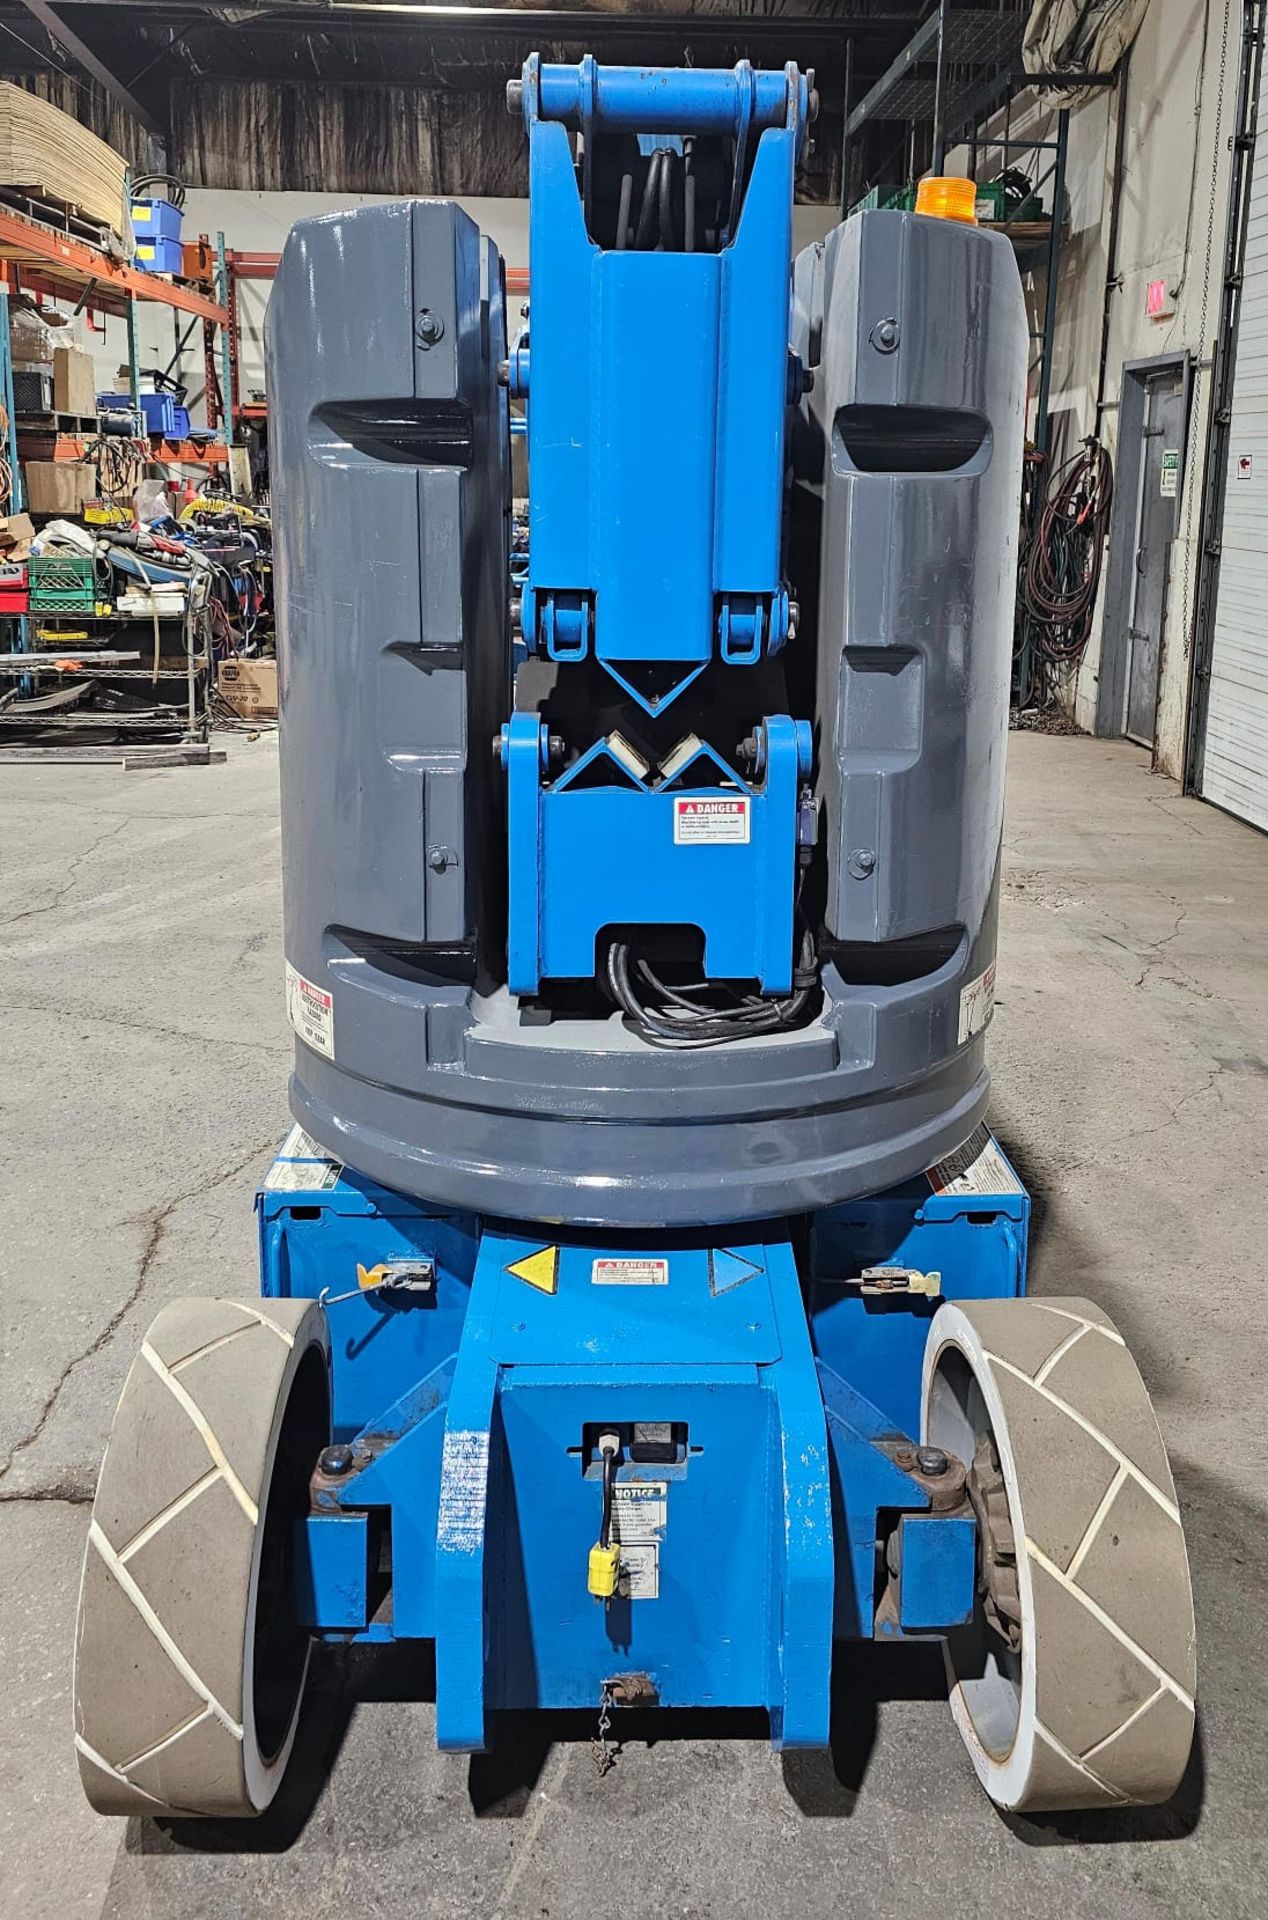 Genie model Z-30/20N Zoom Boom Electric Motorized Man Lift 30' Height & 21' Reach - with 24V Battery - Image 5 of 9